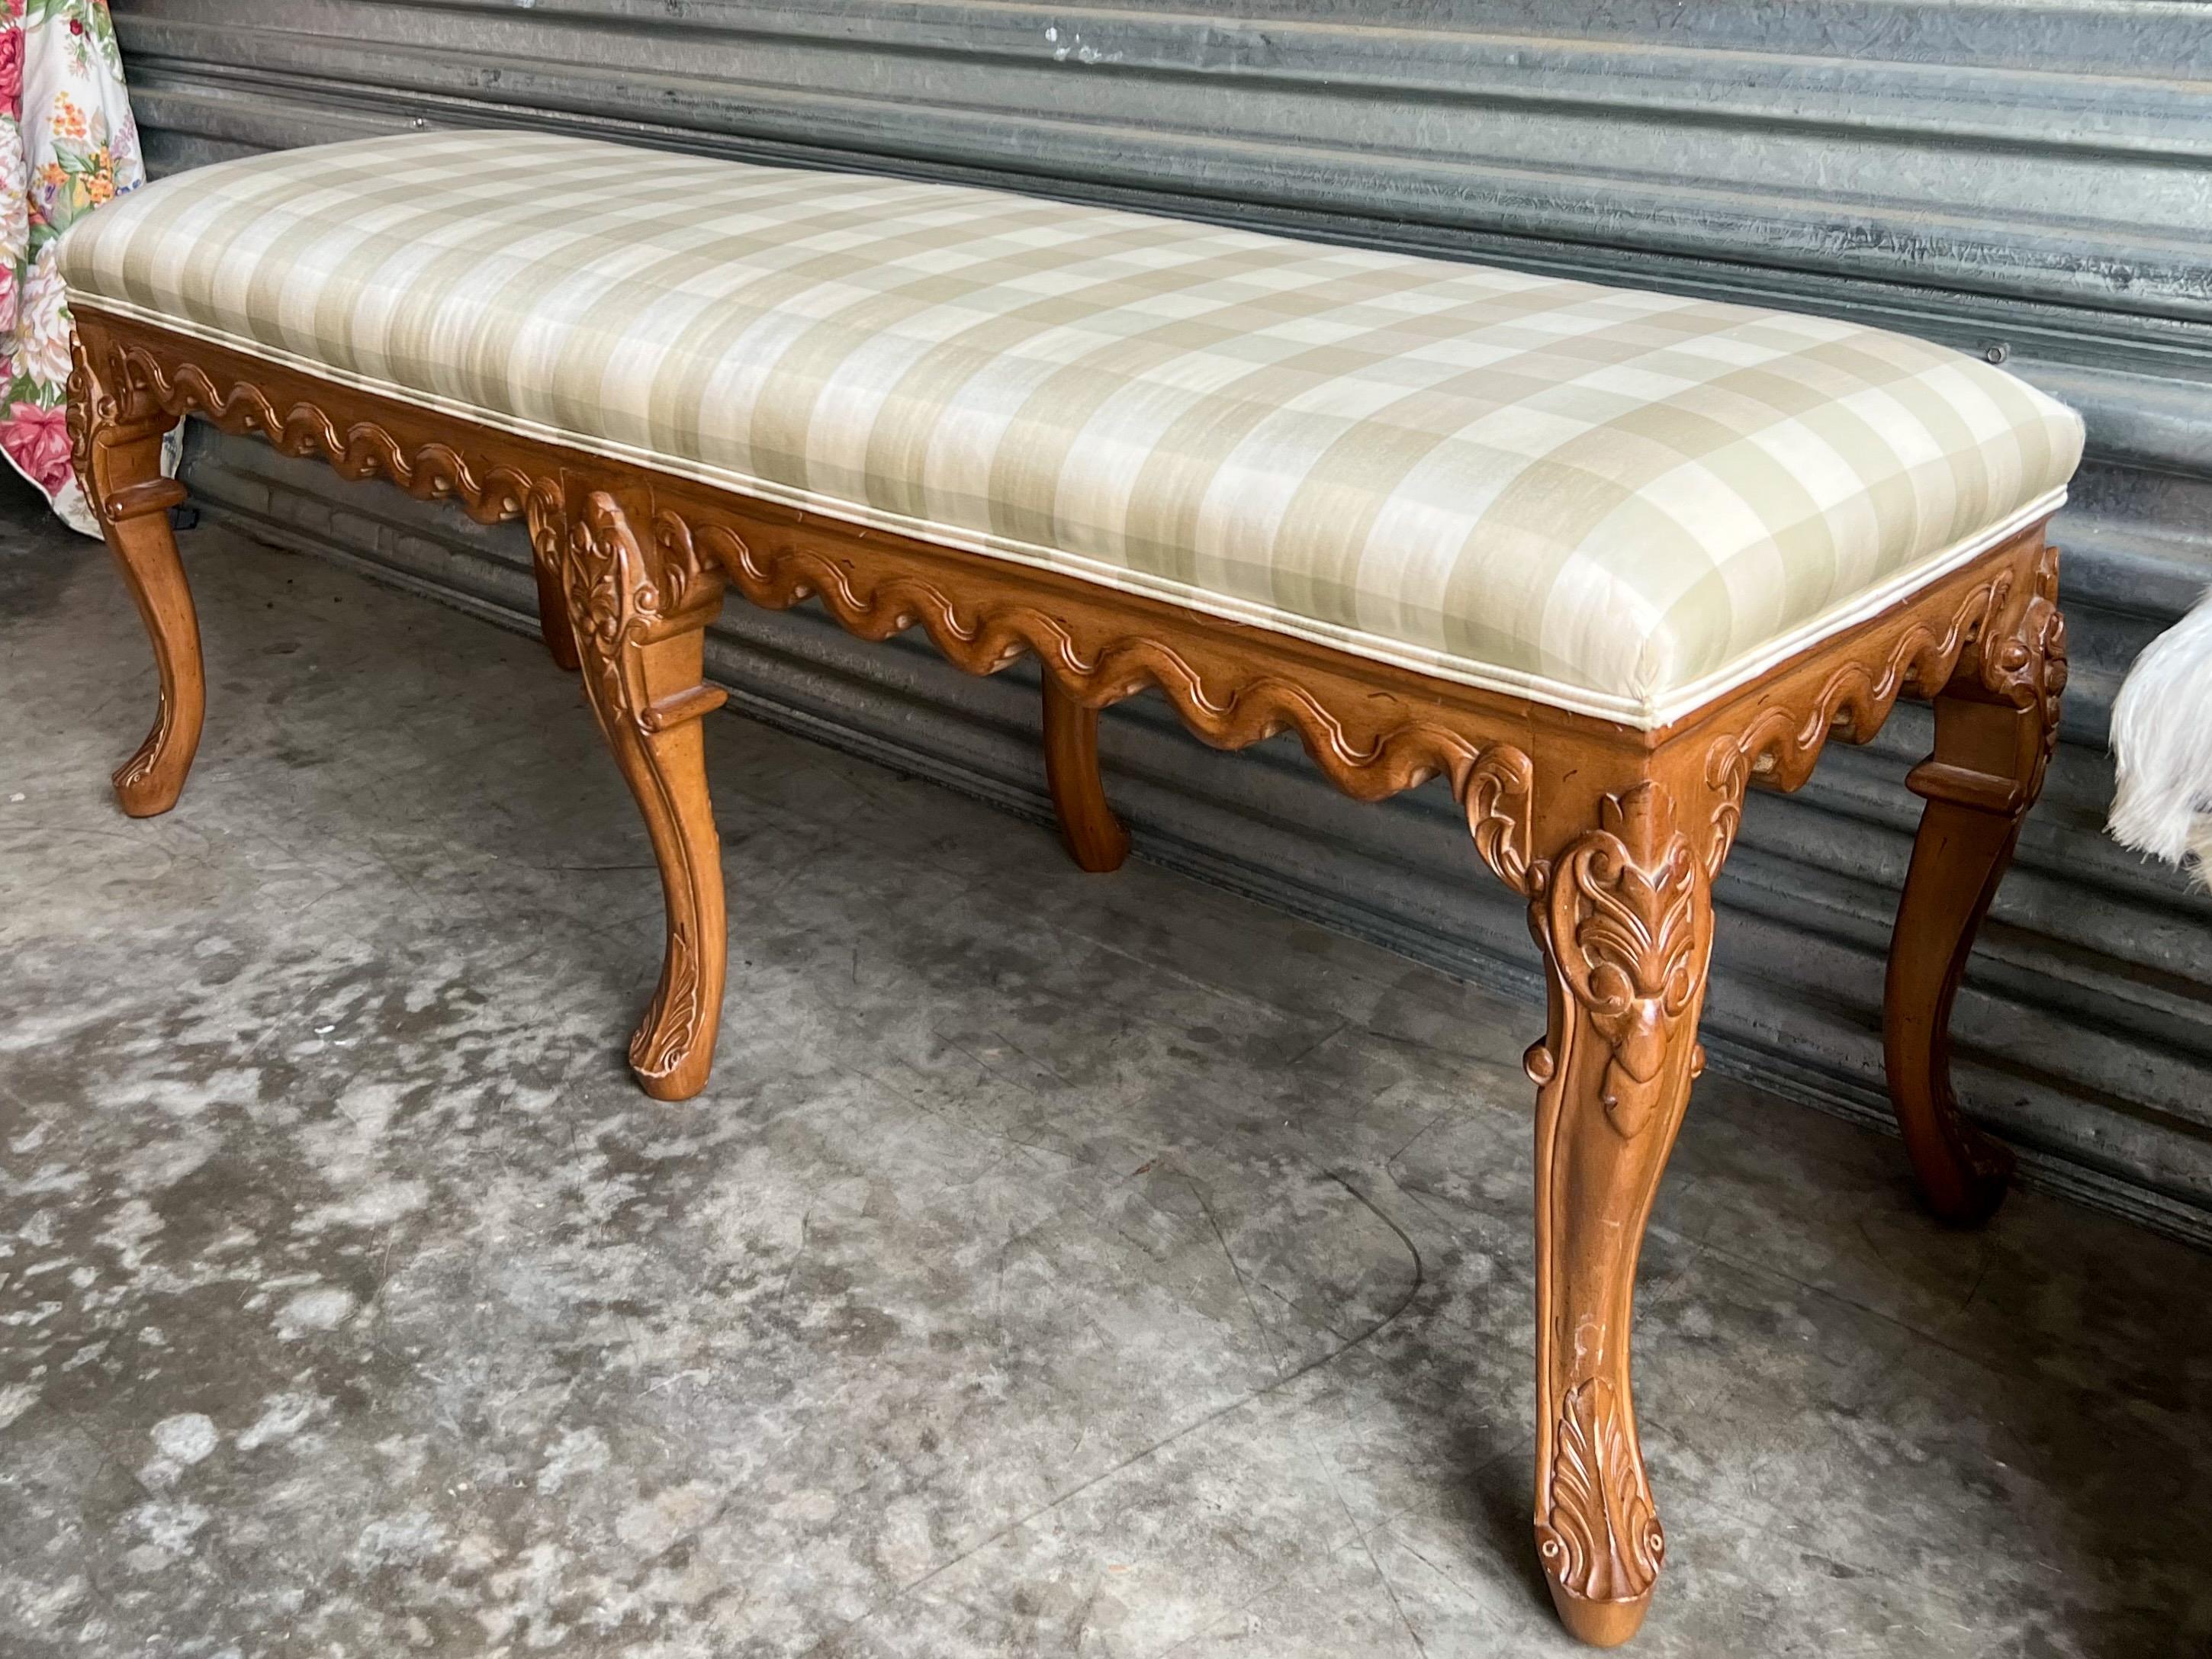 This is a unique bench! It is a carved fruitwood French bench with 6 legs. The vintage fabric is a neutral silk with tonal checks. It is in very good condition. The bench itself most likely dates to the 40s. It is unmarked.